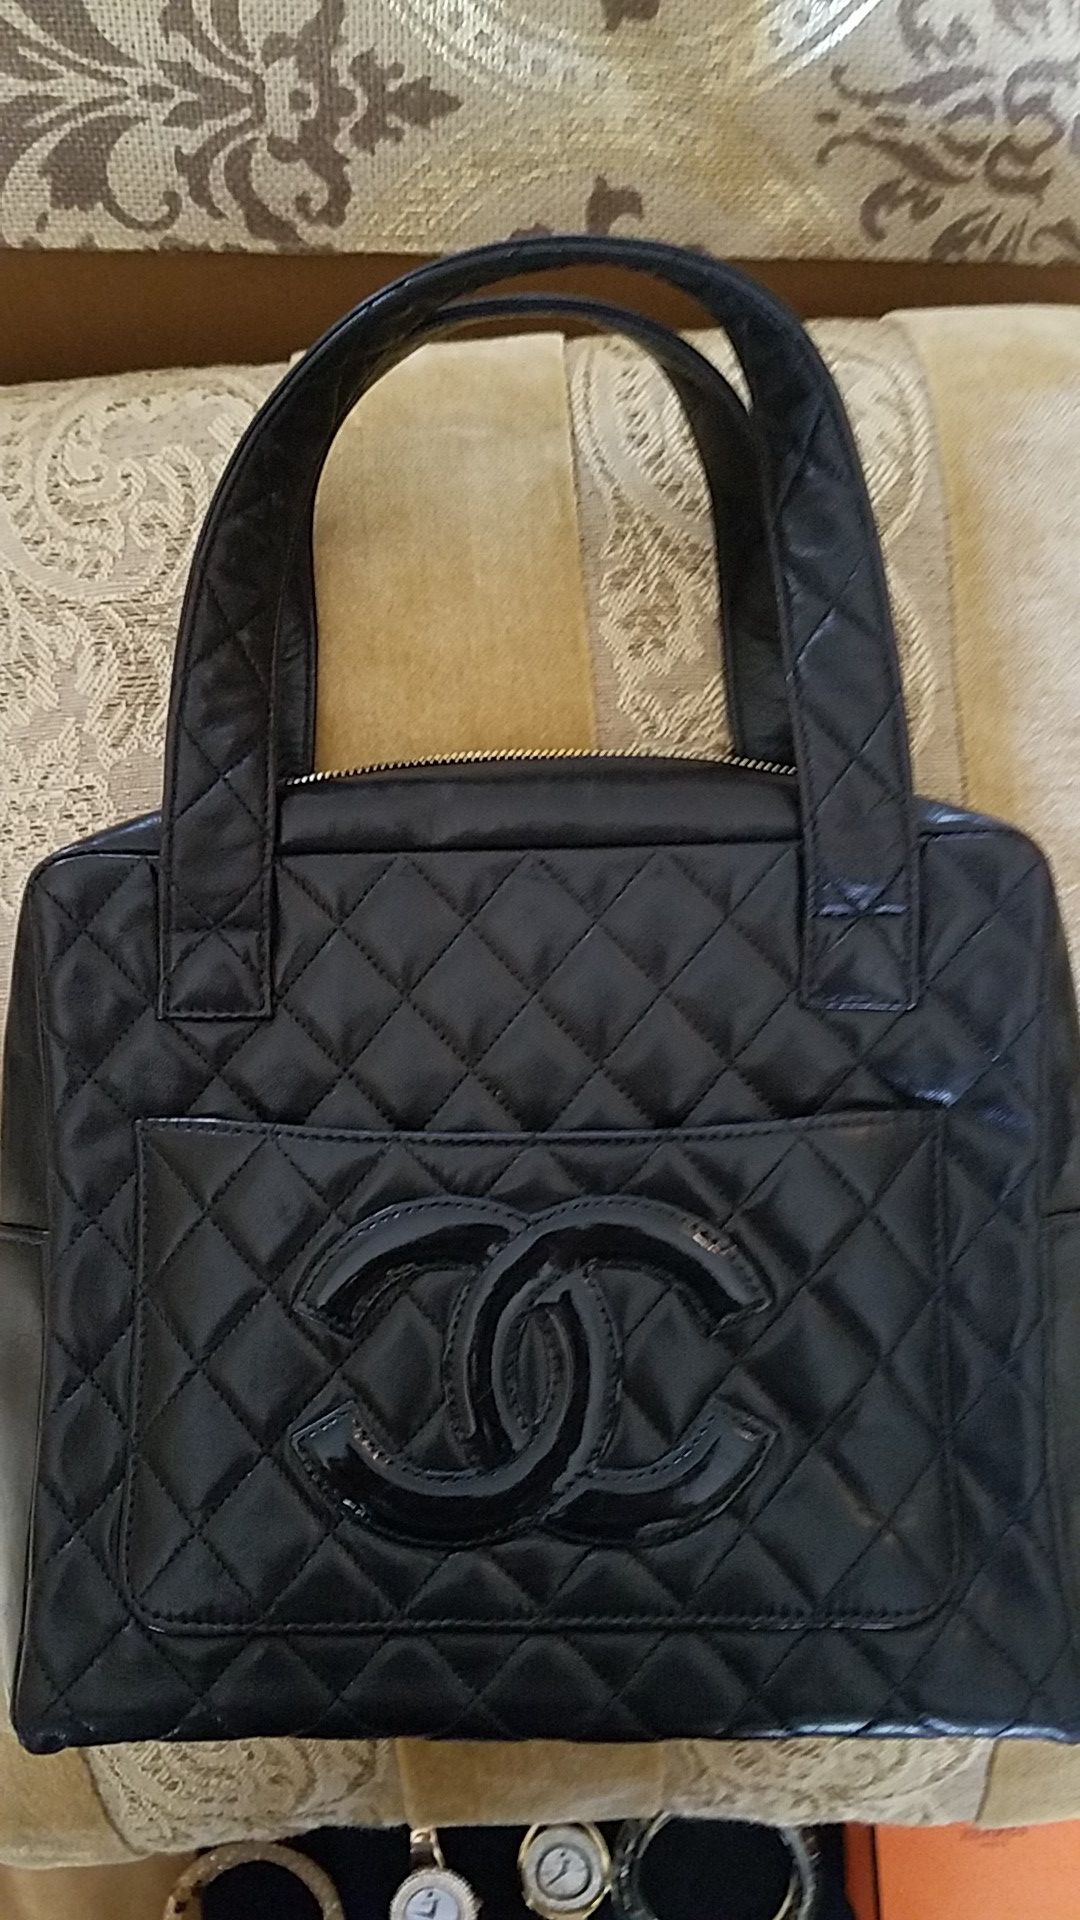 Chanel hand bag was 1000. Now 500. Perfect condition